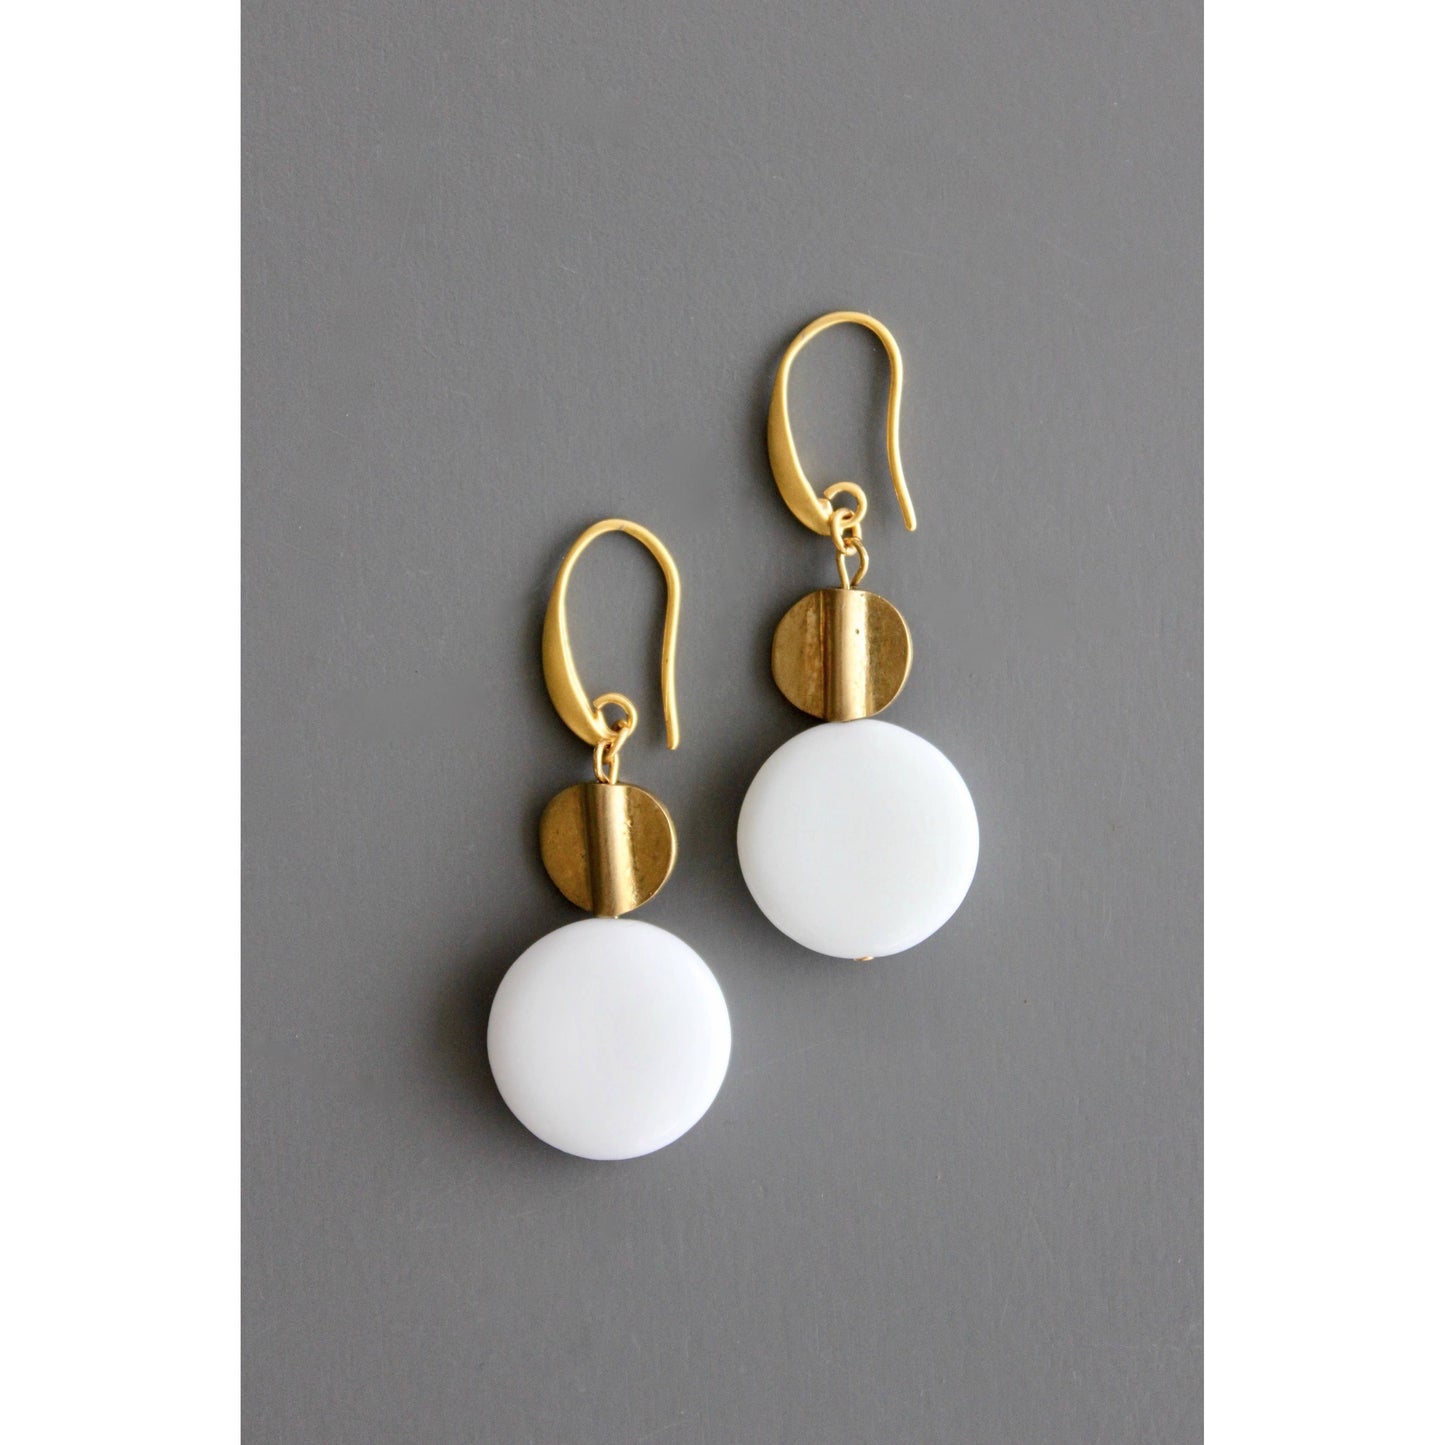 David Aubrey - White agate and brass earrings